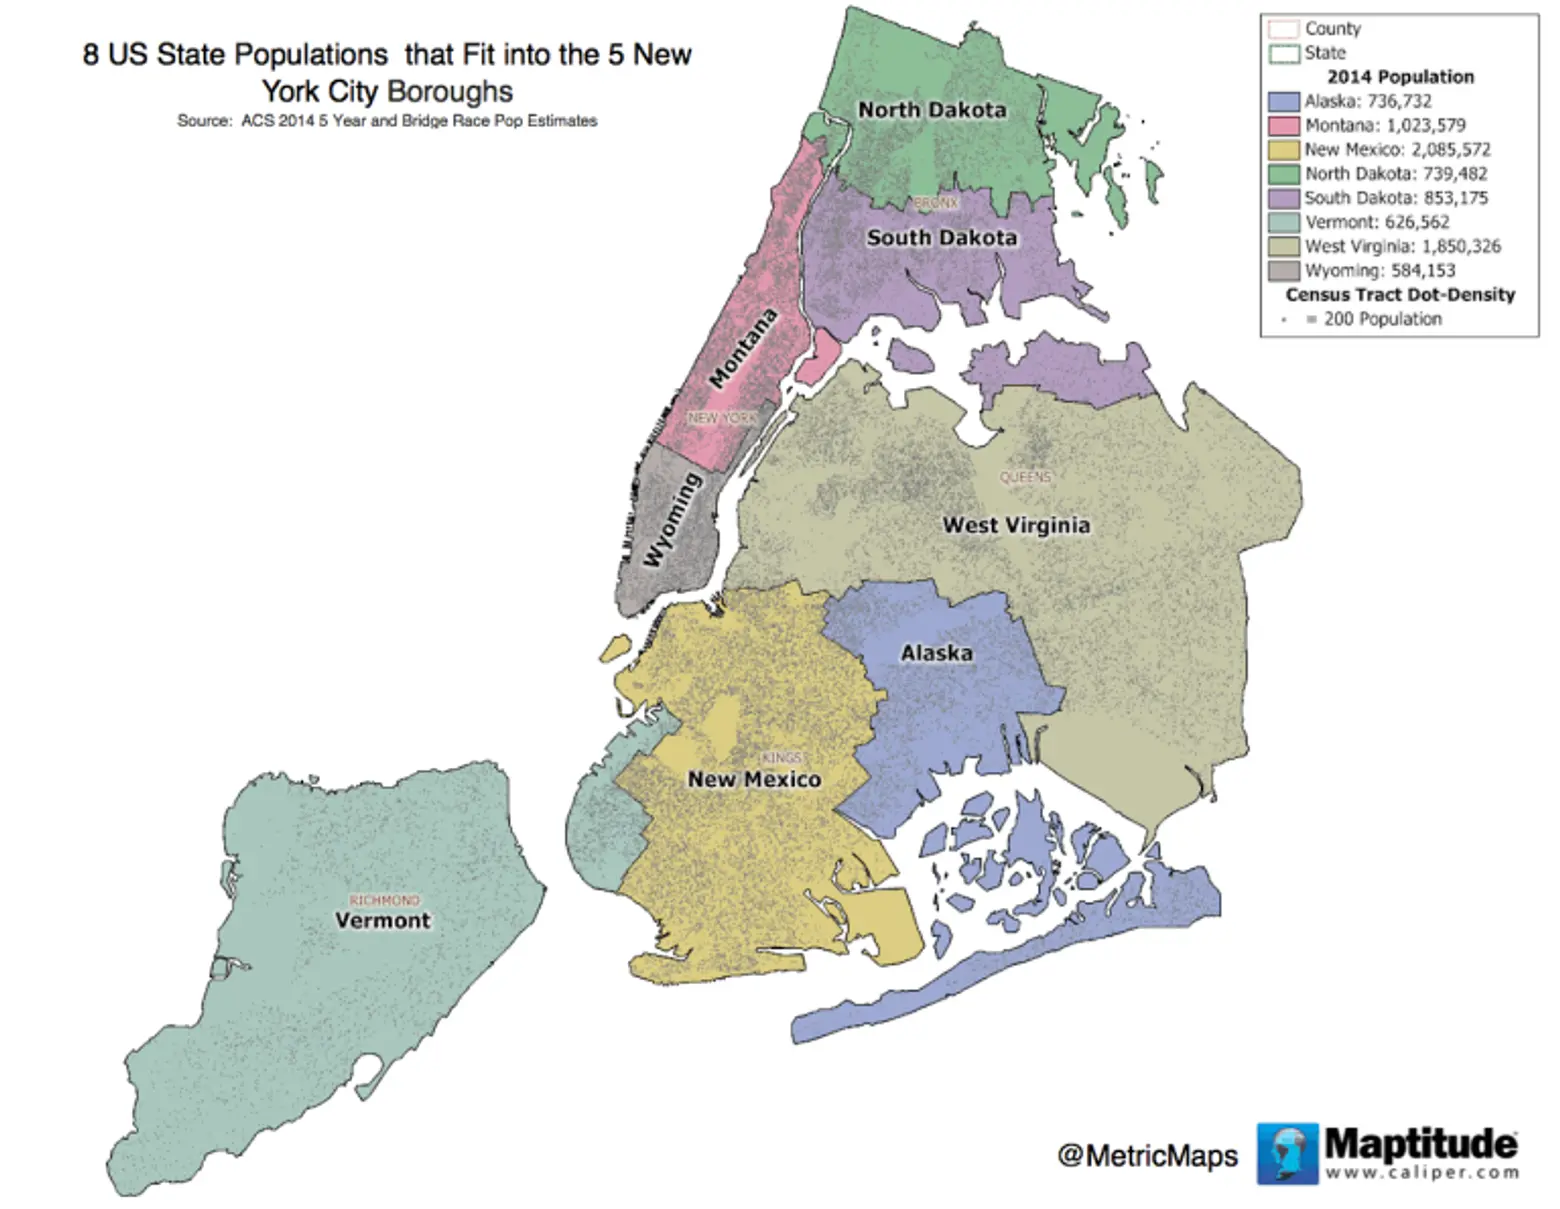 You could squeeze the population of 8 states into NYC’s 5 boroughs